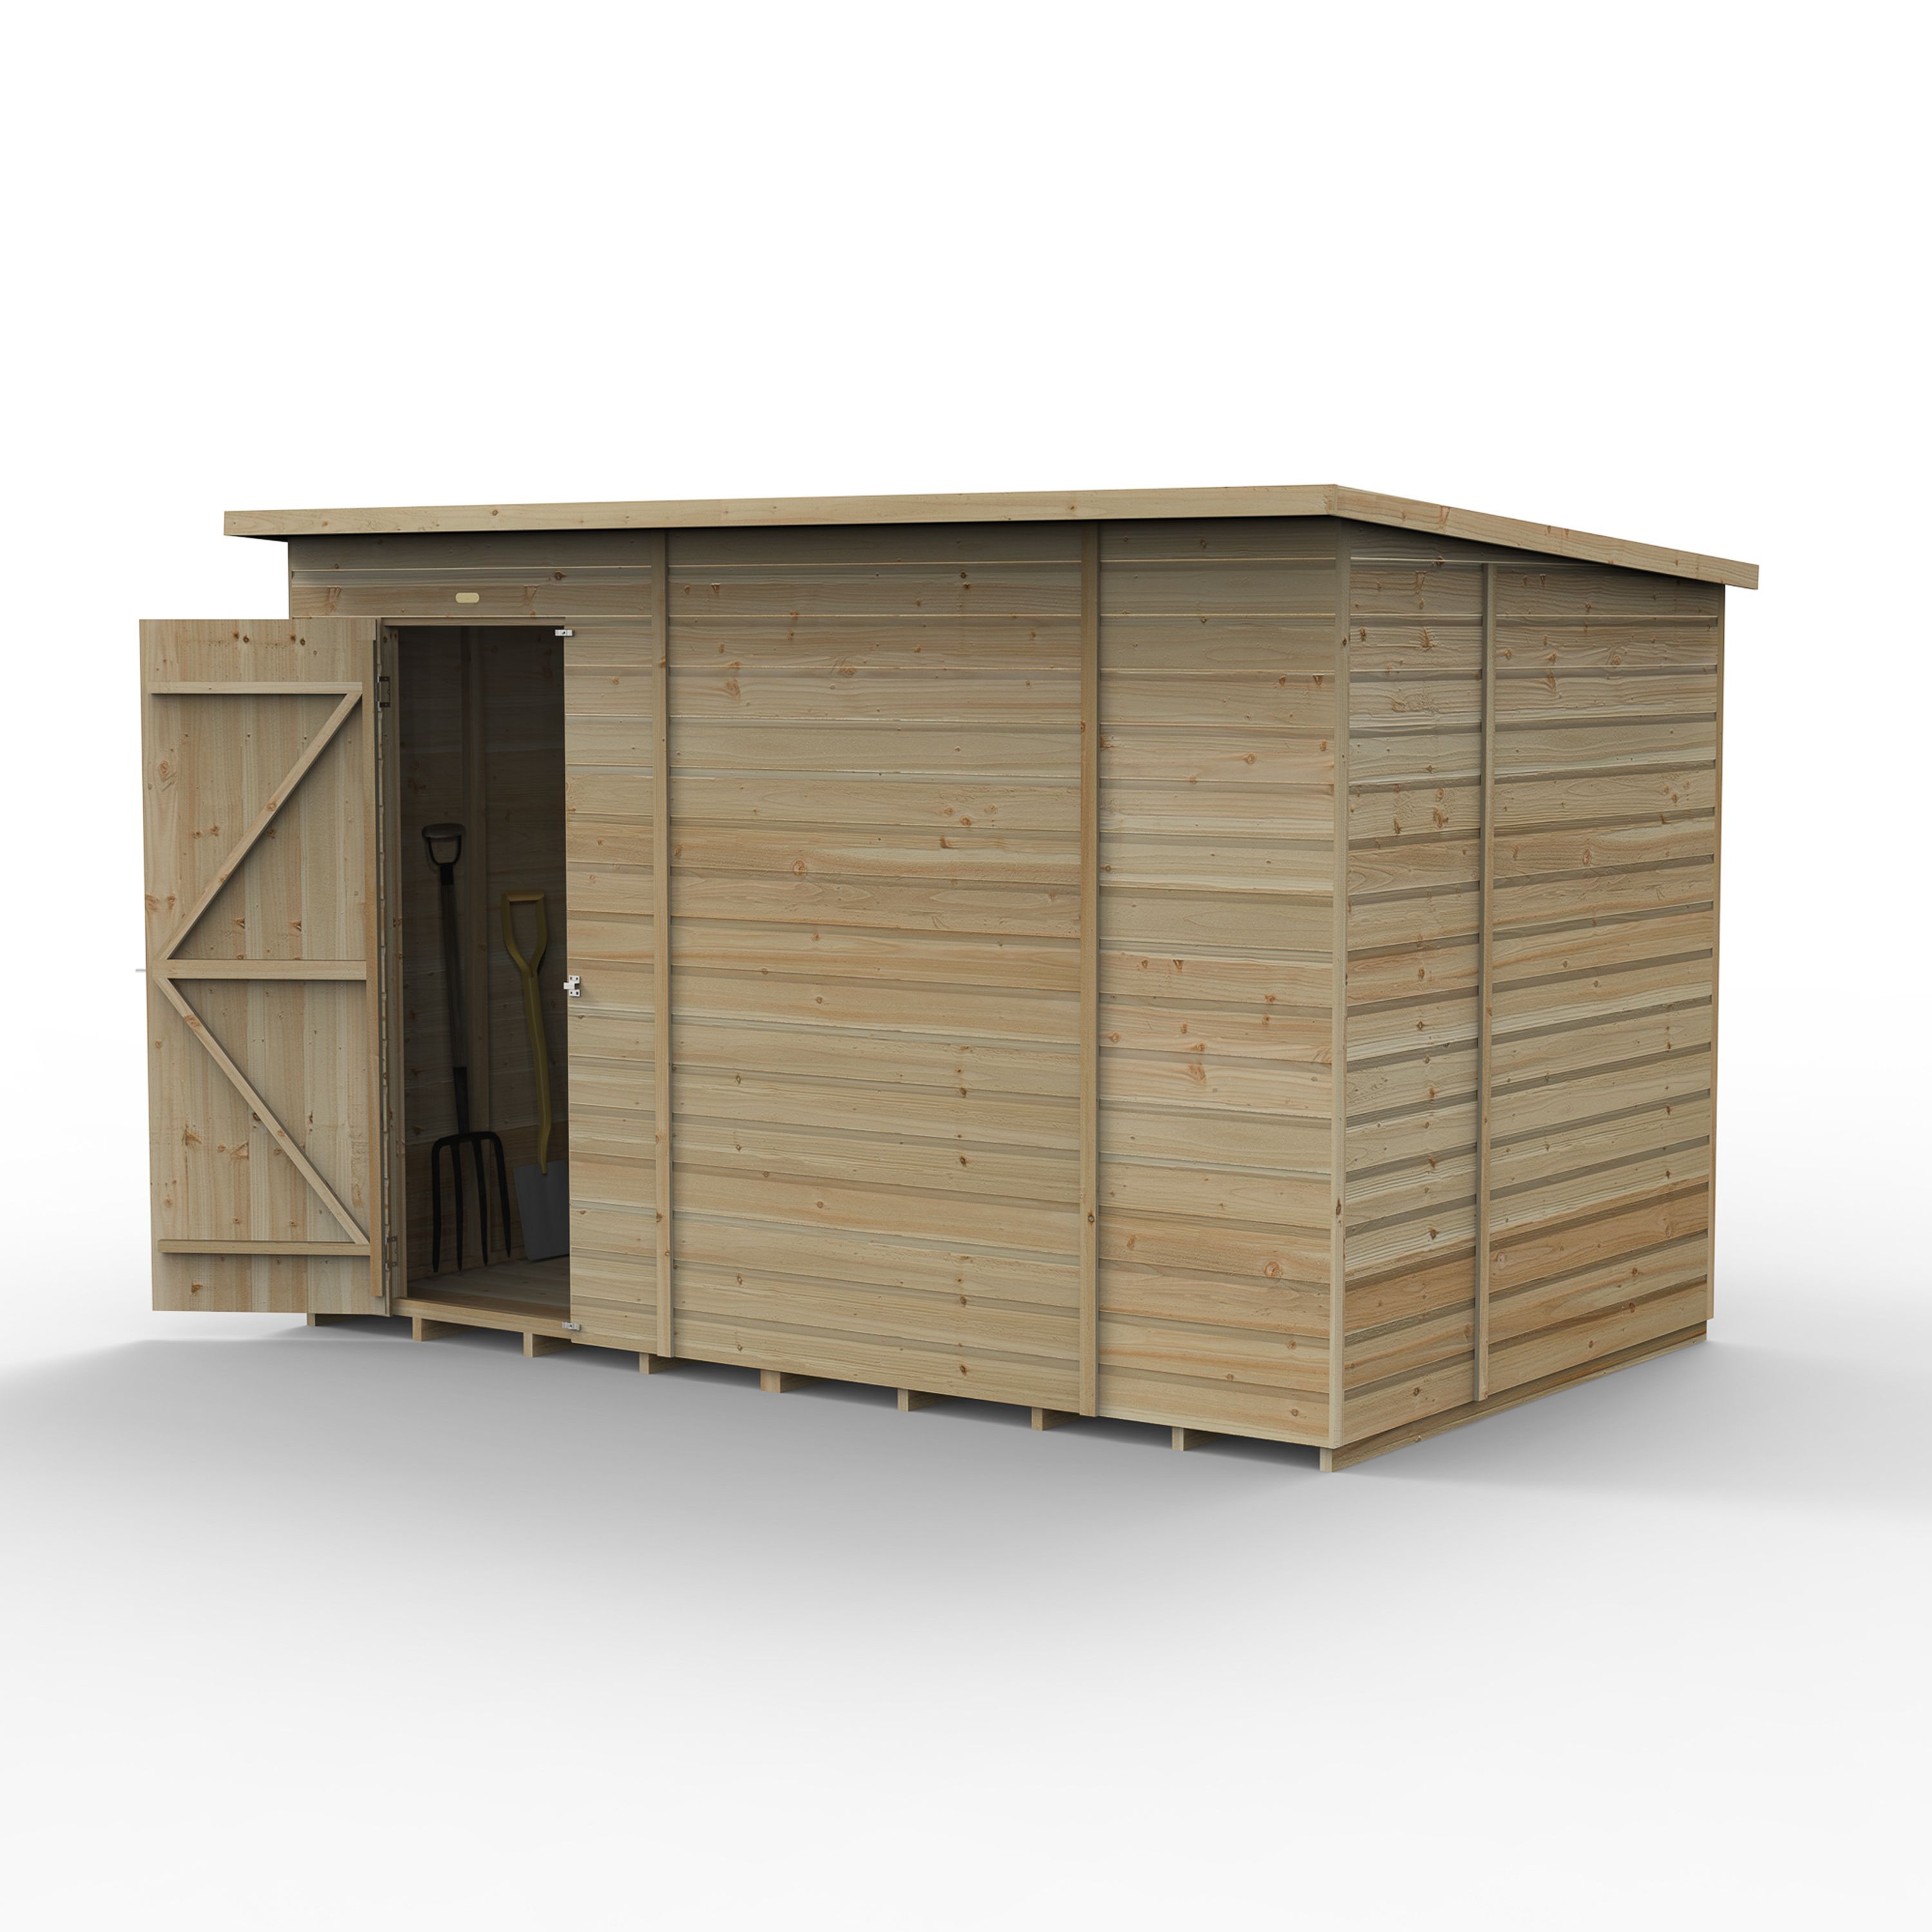 Forest Garden Beckwood 10x6 ft Pent Natural timber Wooden 2 door Shed with floor